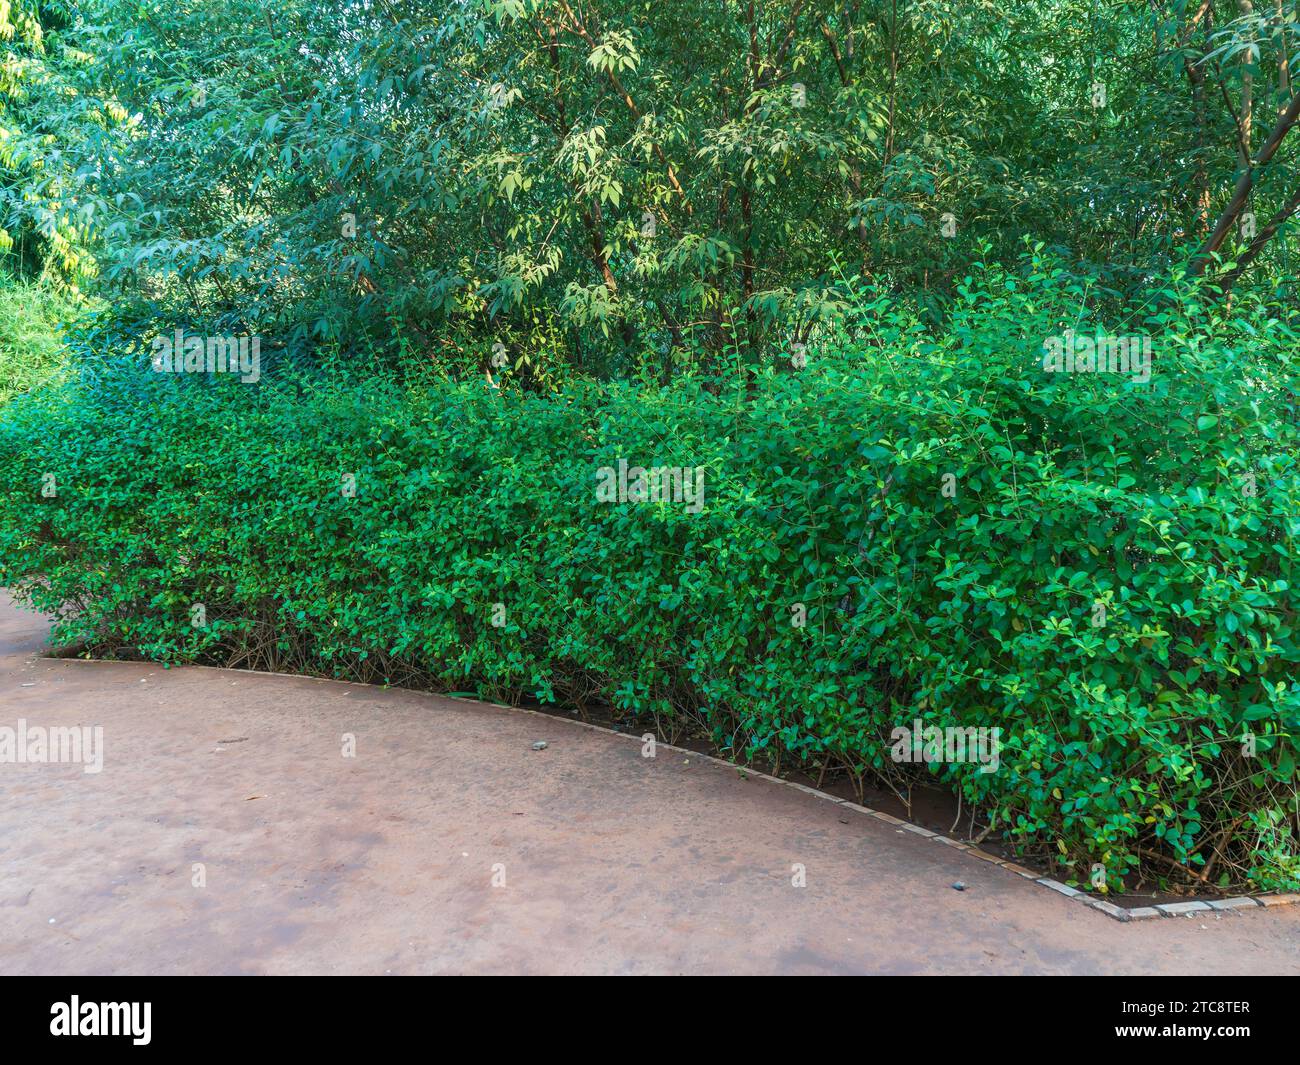 This is a beautiful Garden photos. in this photo include plants blue sky trees and beautiful nature views. This is Alamy exclusive image Garden photo Stock Photo